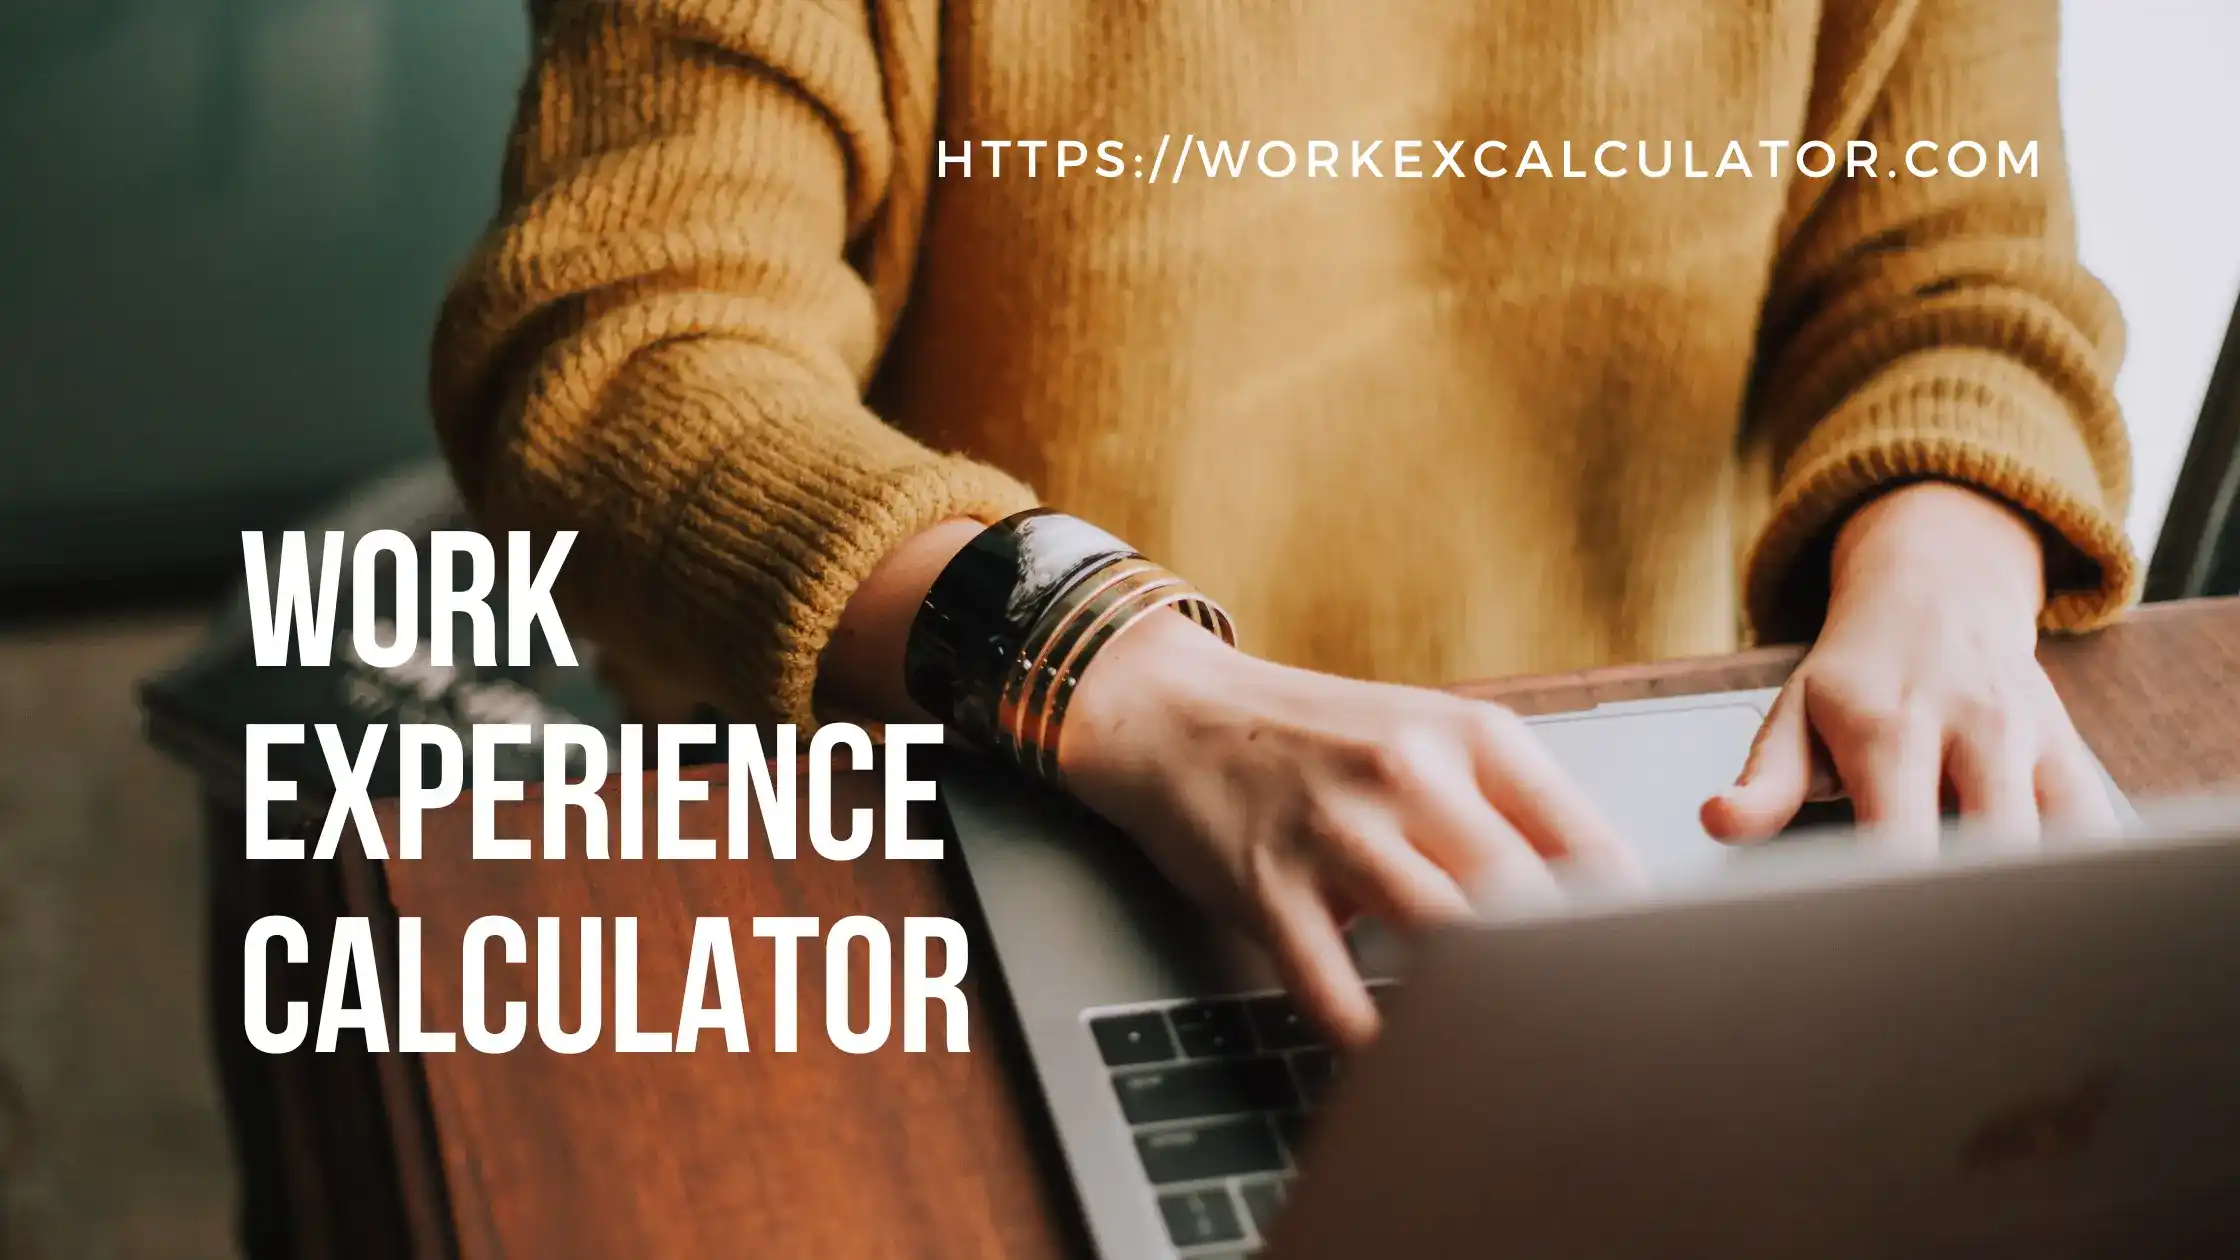 Total work experience calculator